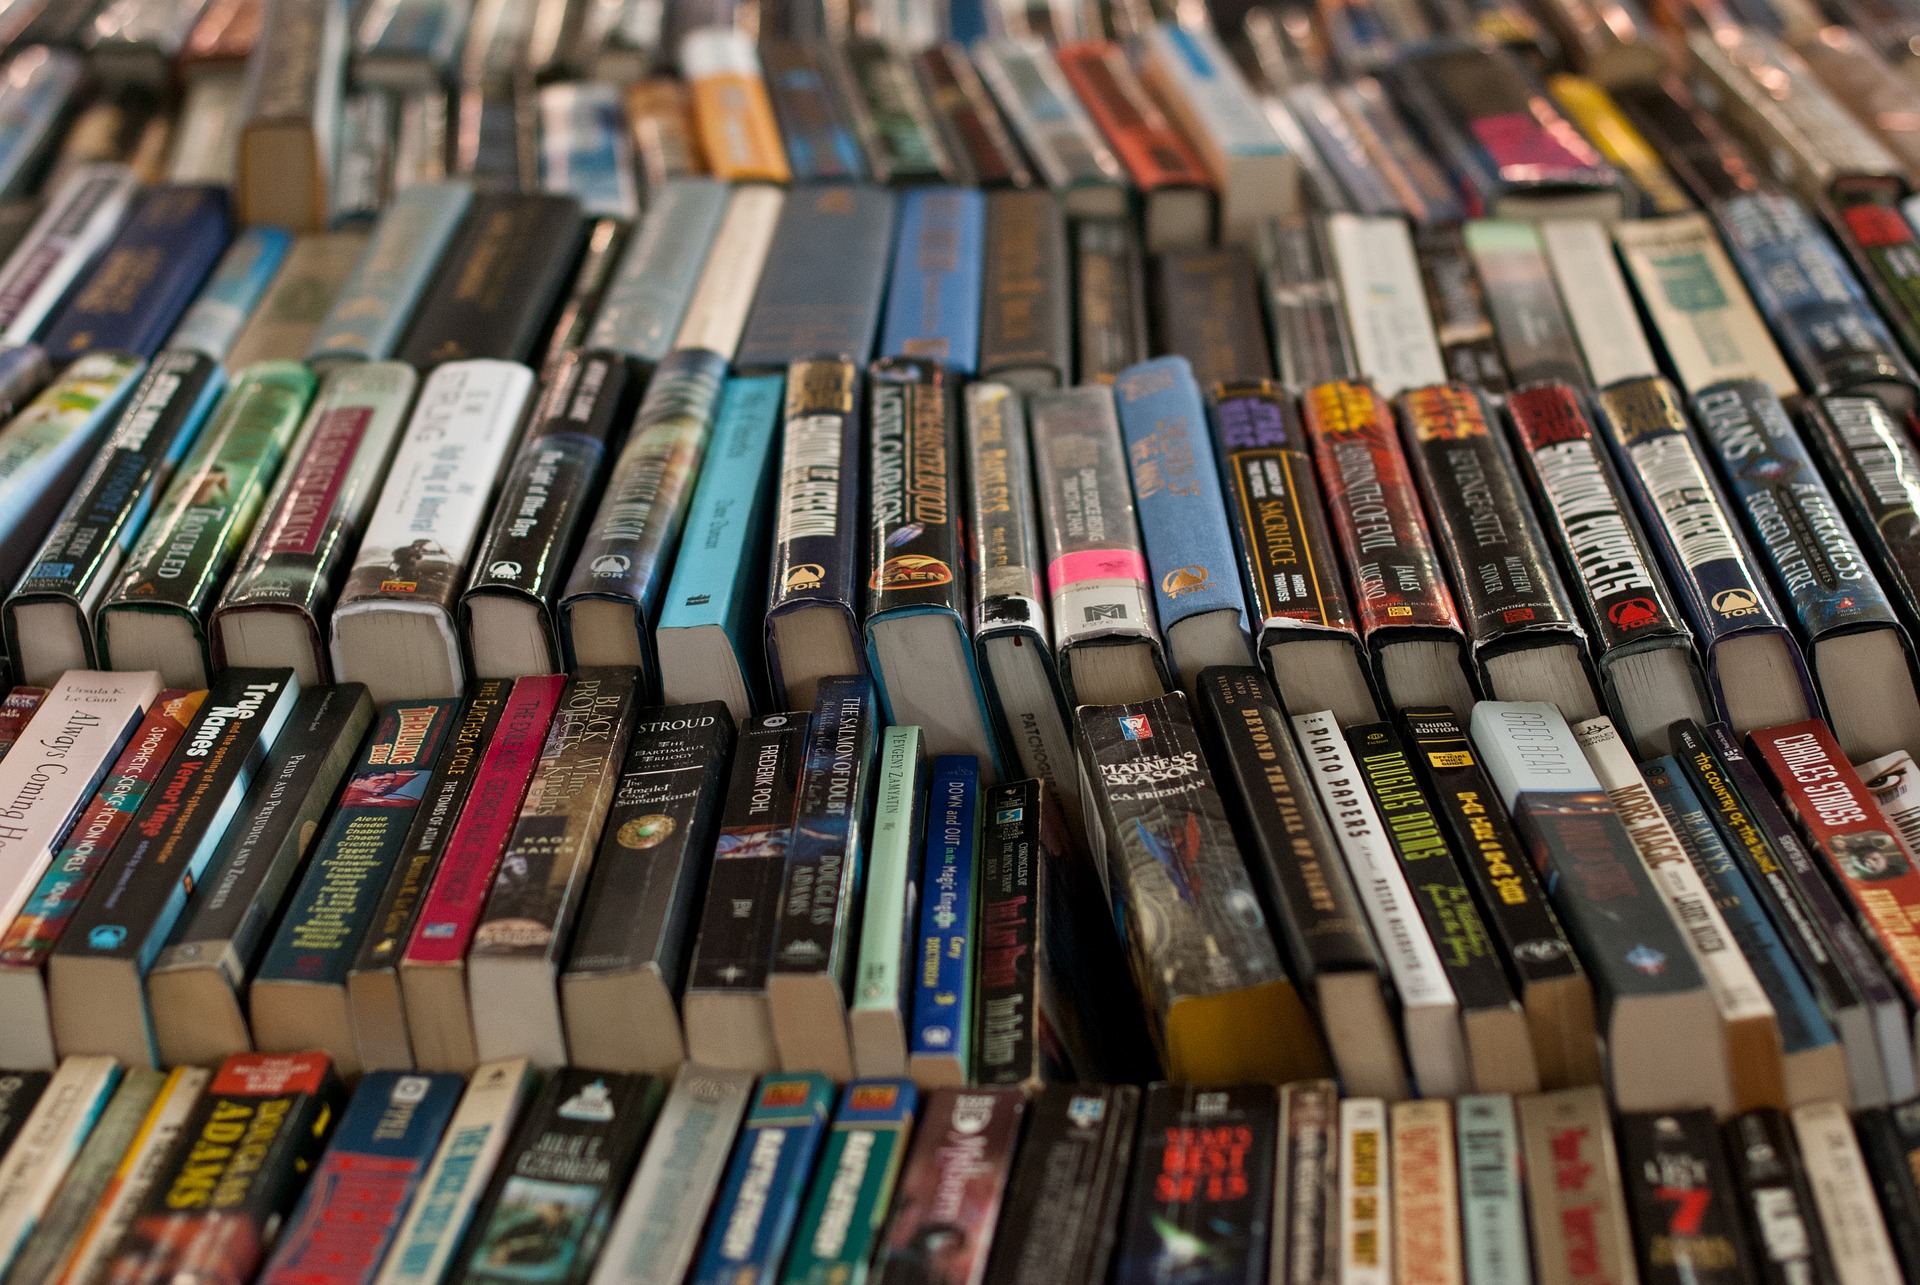 Photo of hundreds of books lined up on a table.